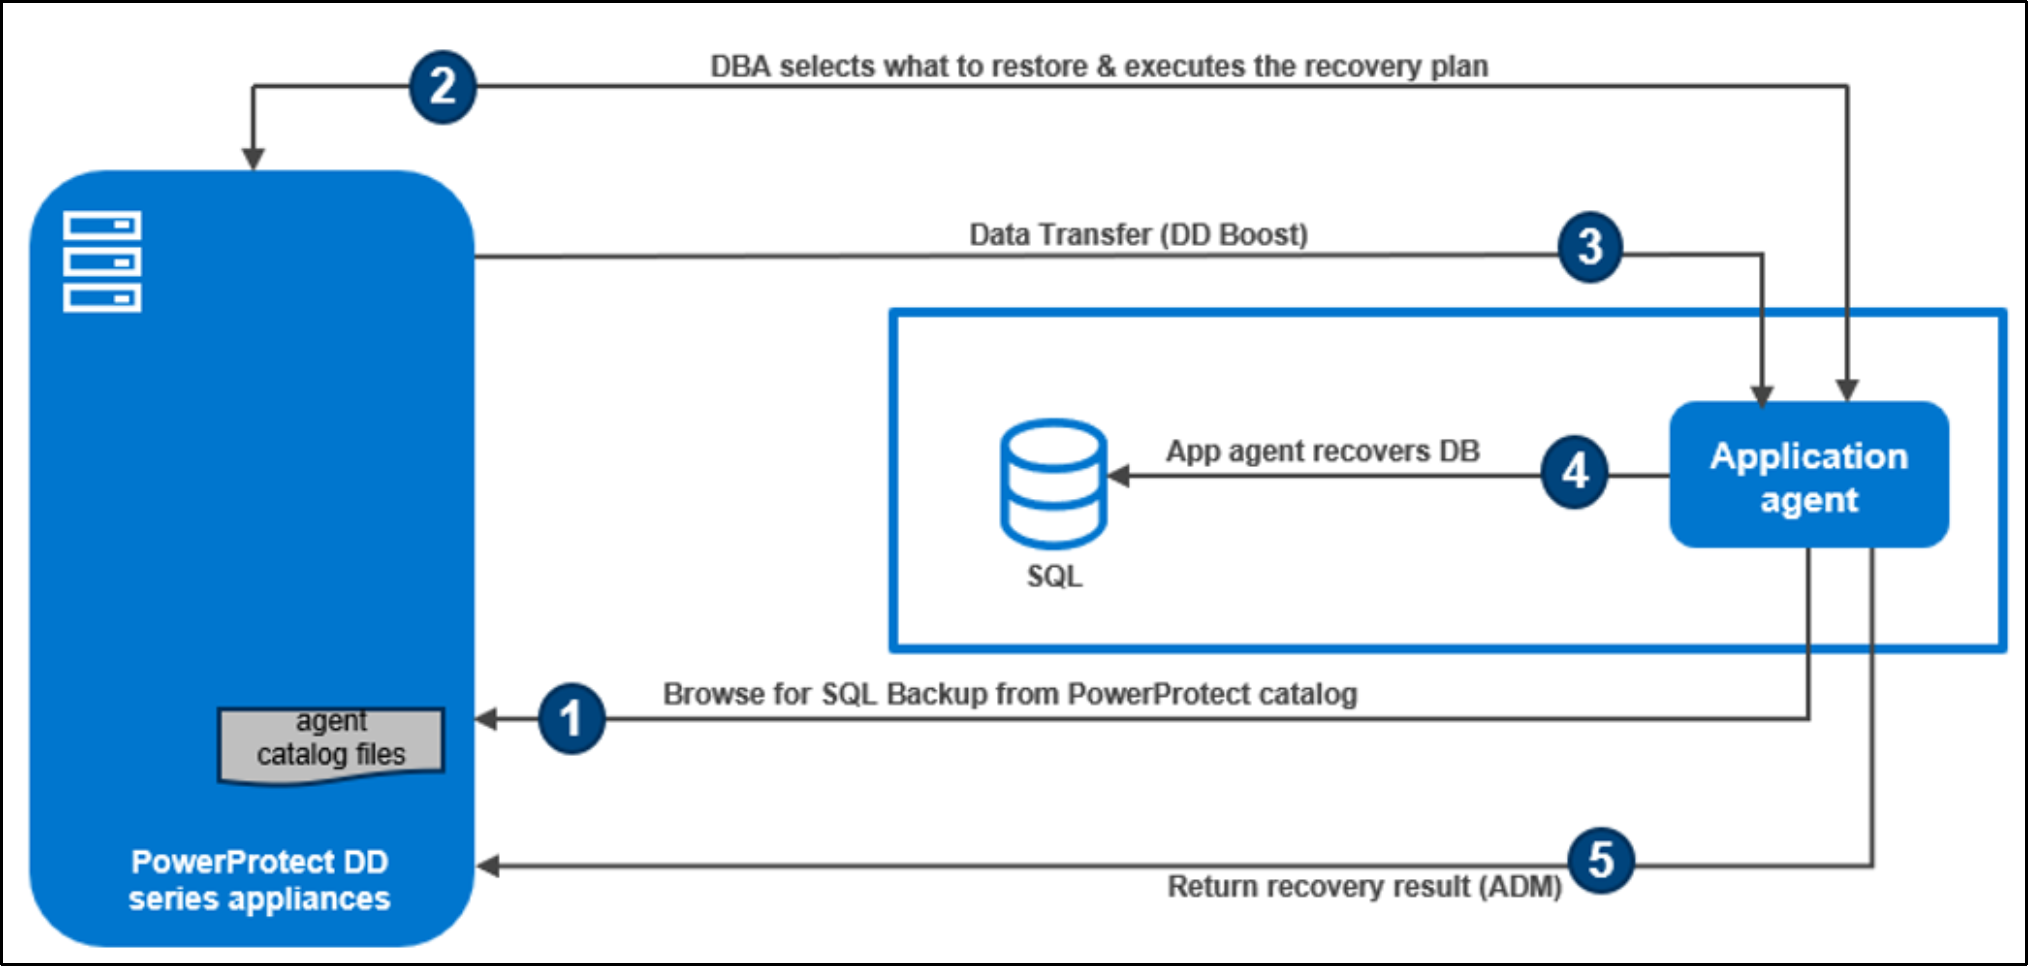 The image shows the restore workflow for databases using the SSMS plug-in